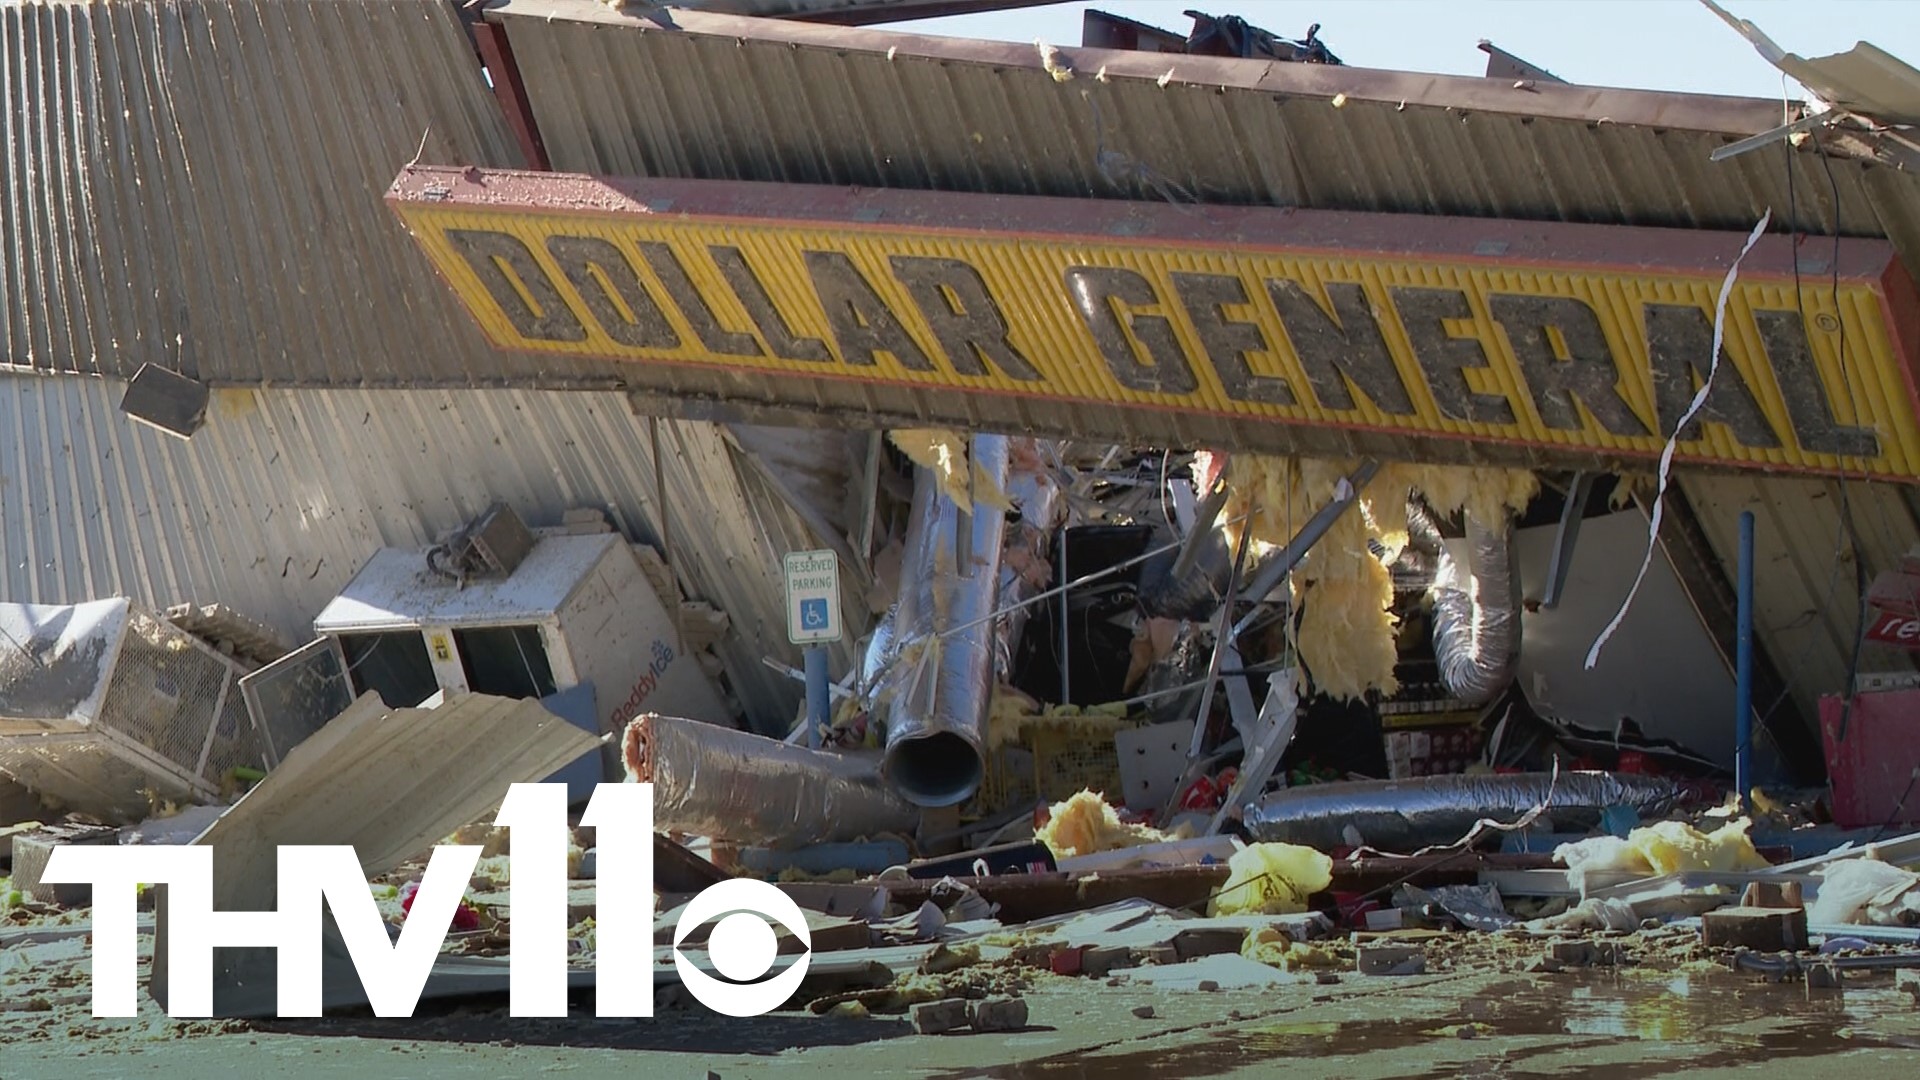 One week after a deadly tornado tore through parts of Arkansas, the community of Leachville is still working to pick up the pieces.